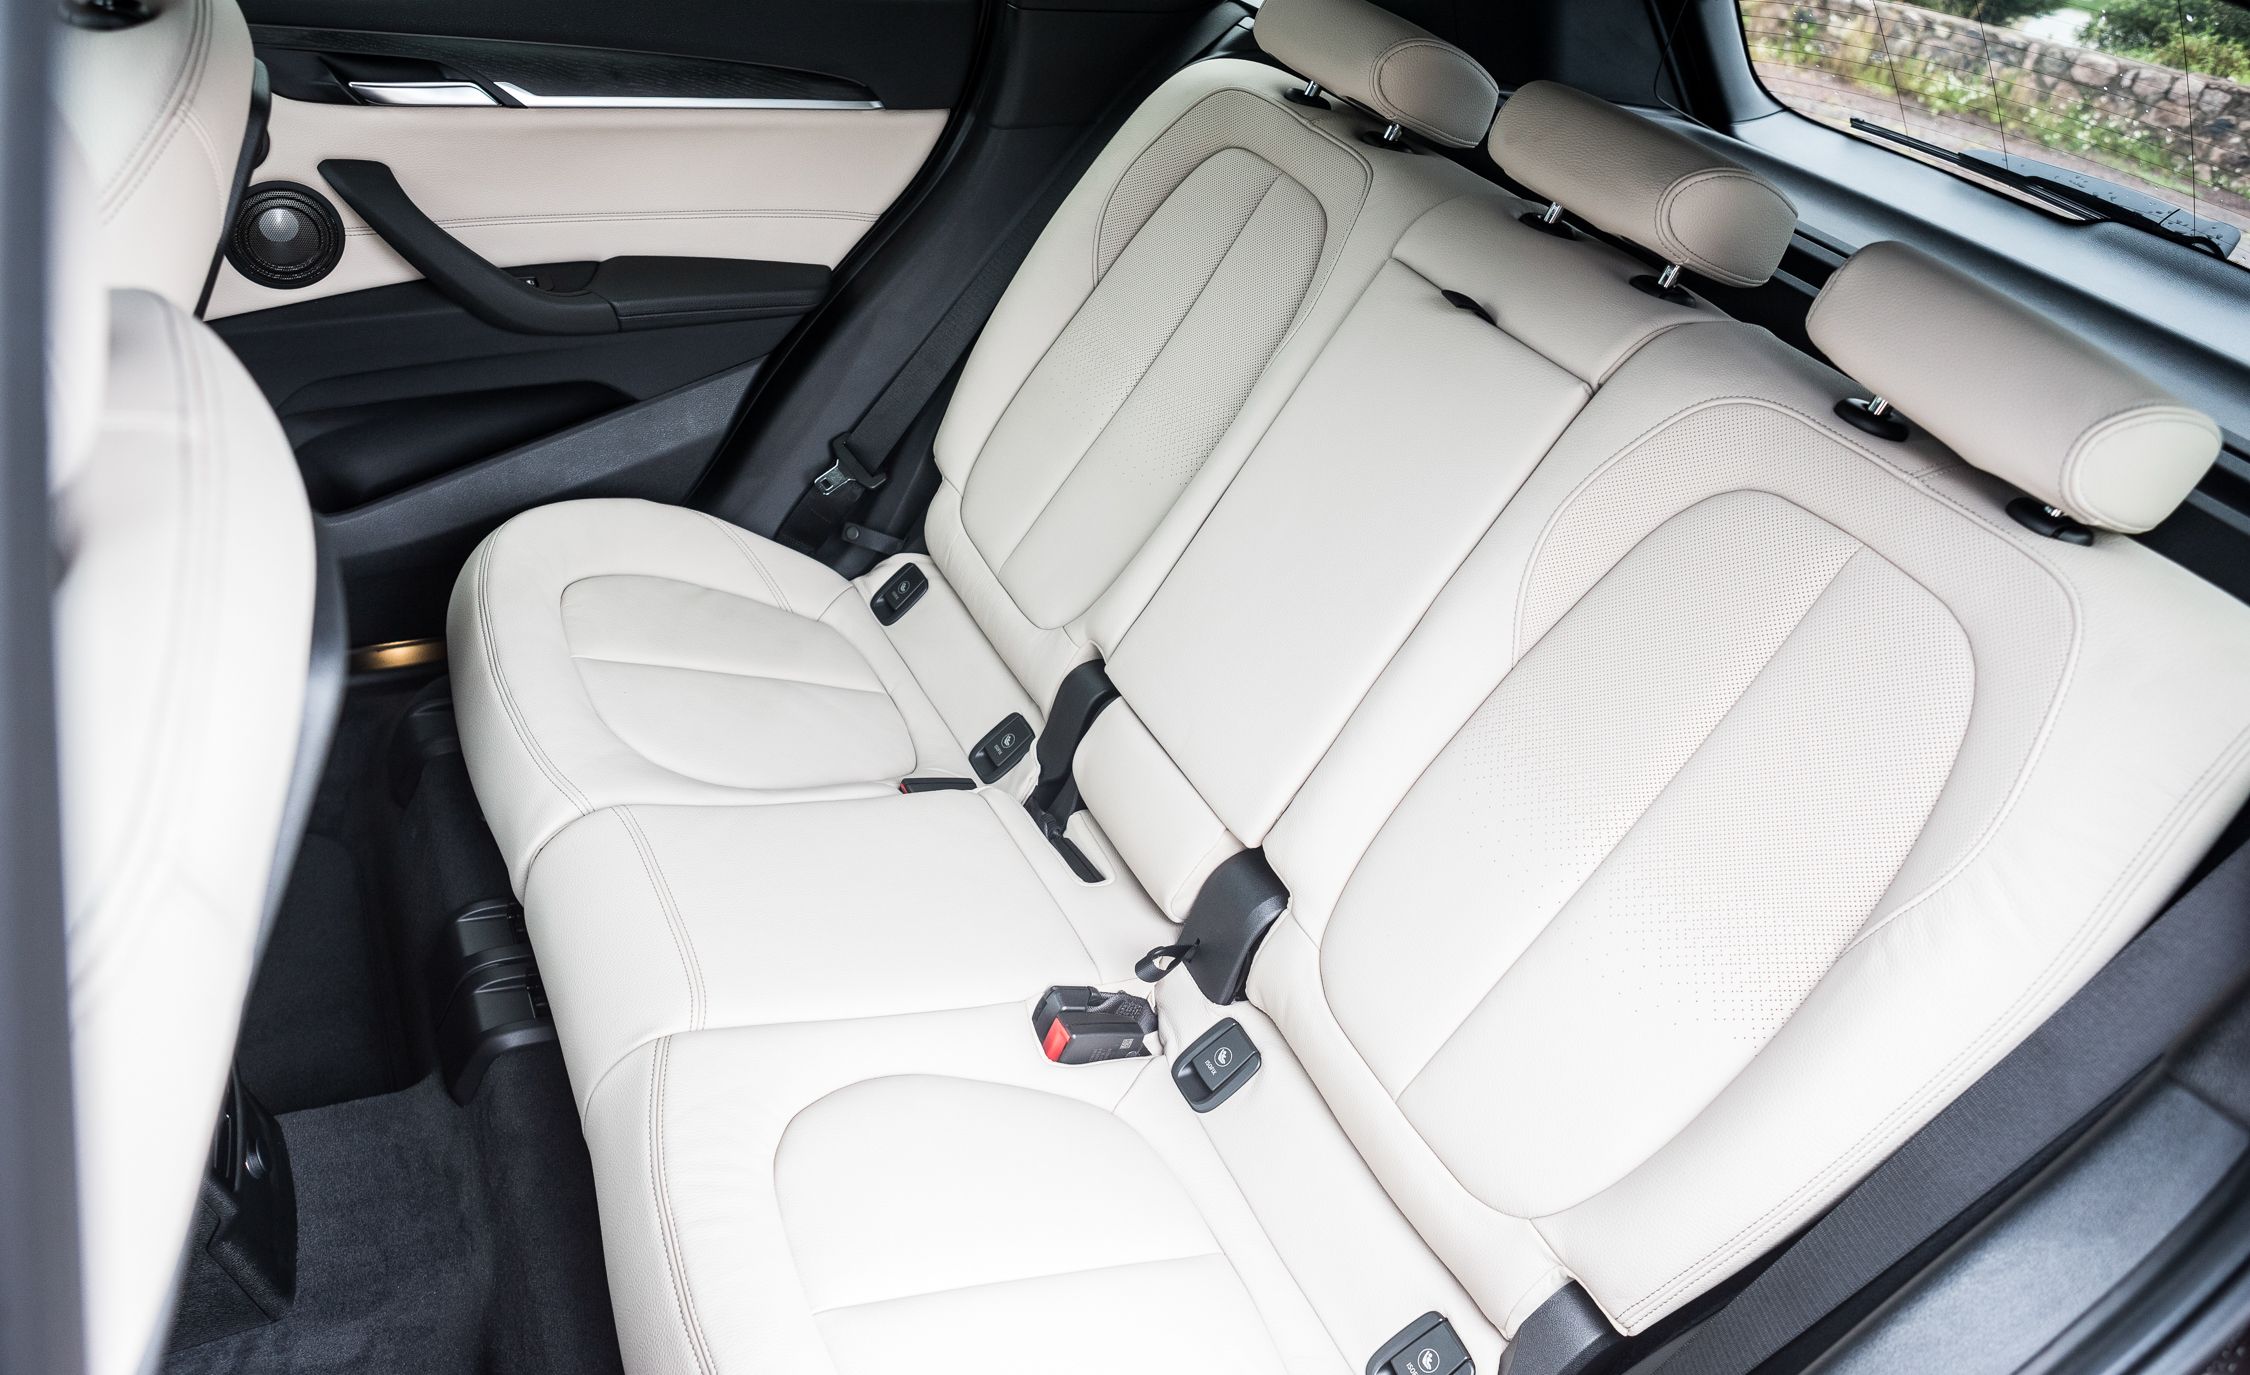 2016 Bmw X1 Interior Seats Rear (View 14 of 36)